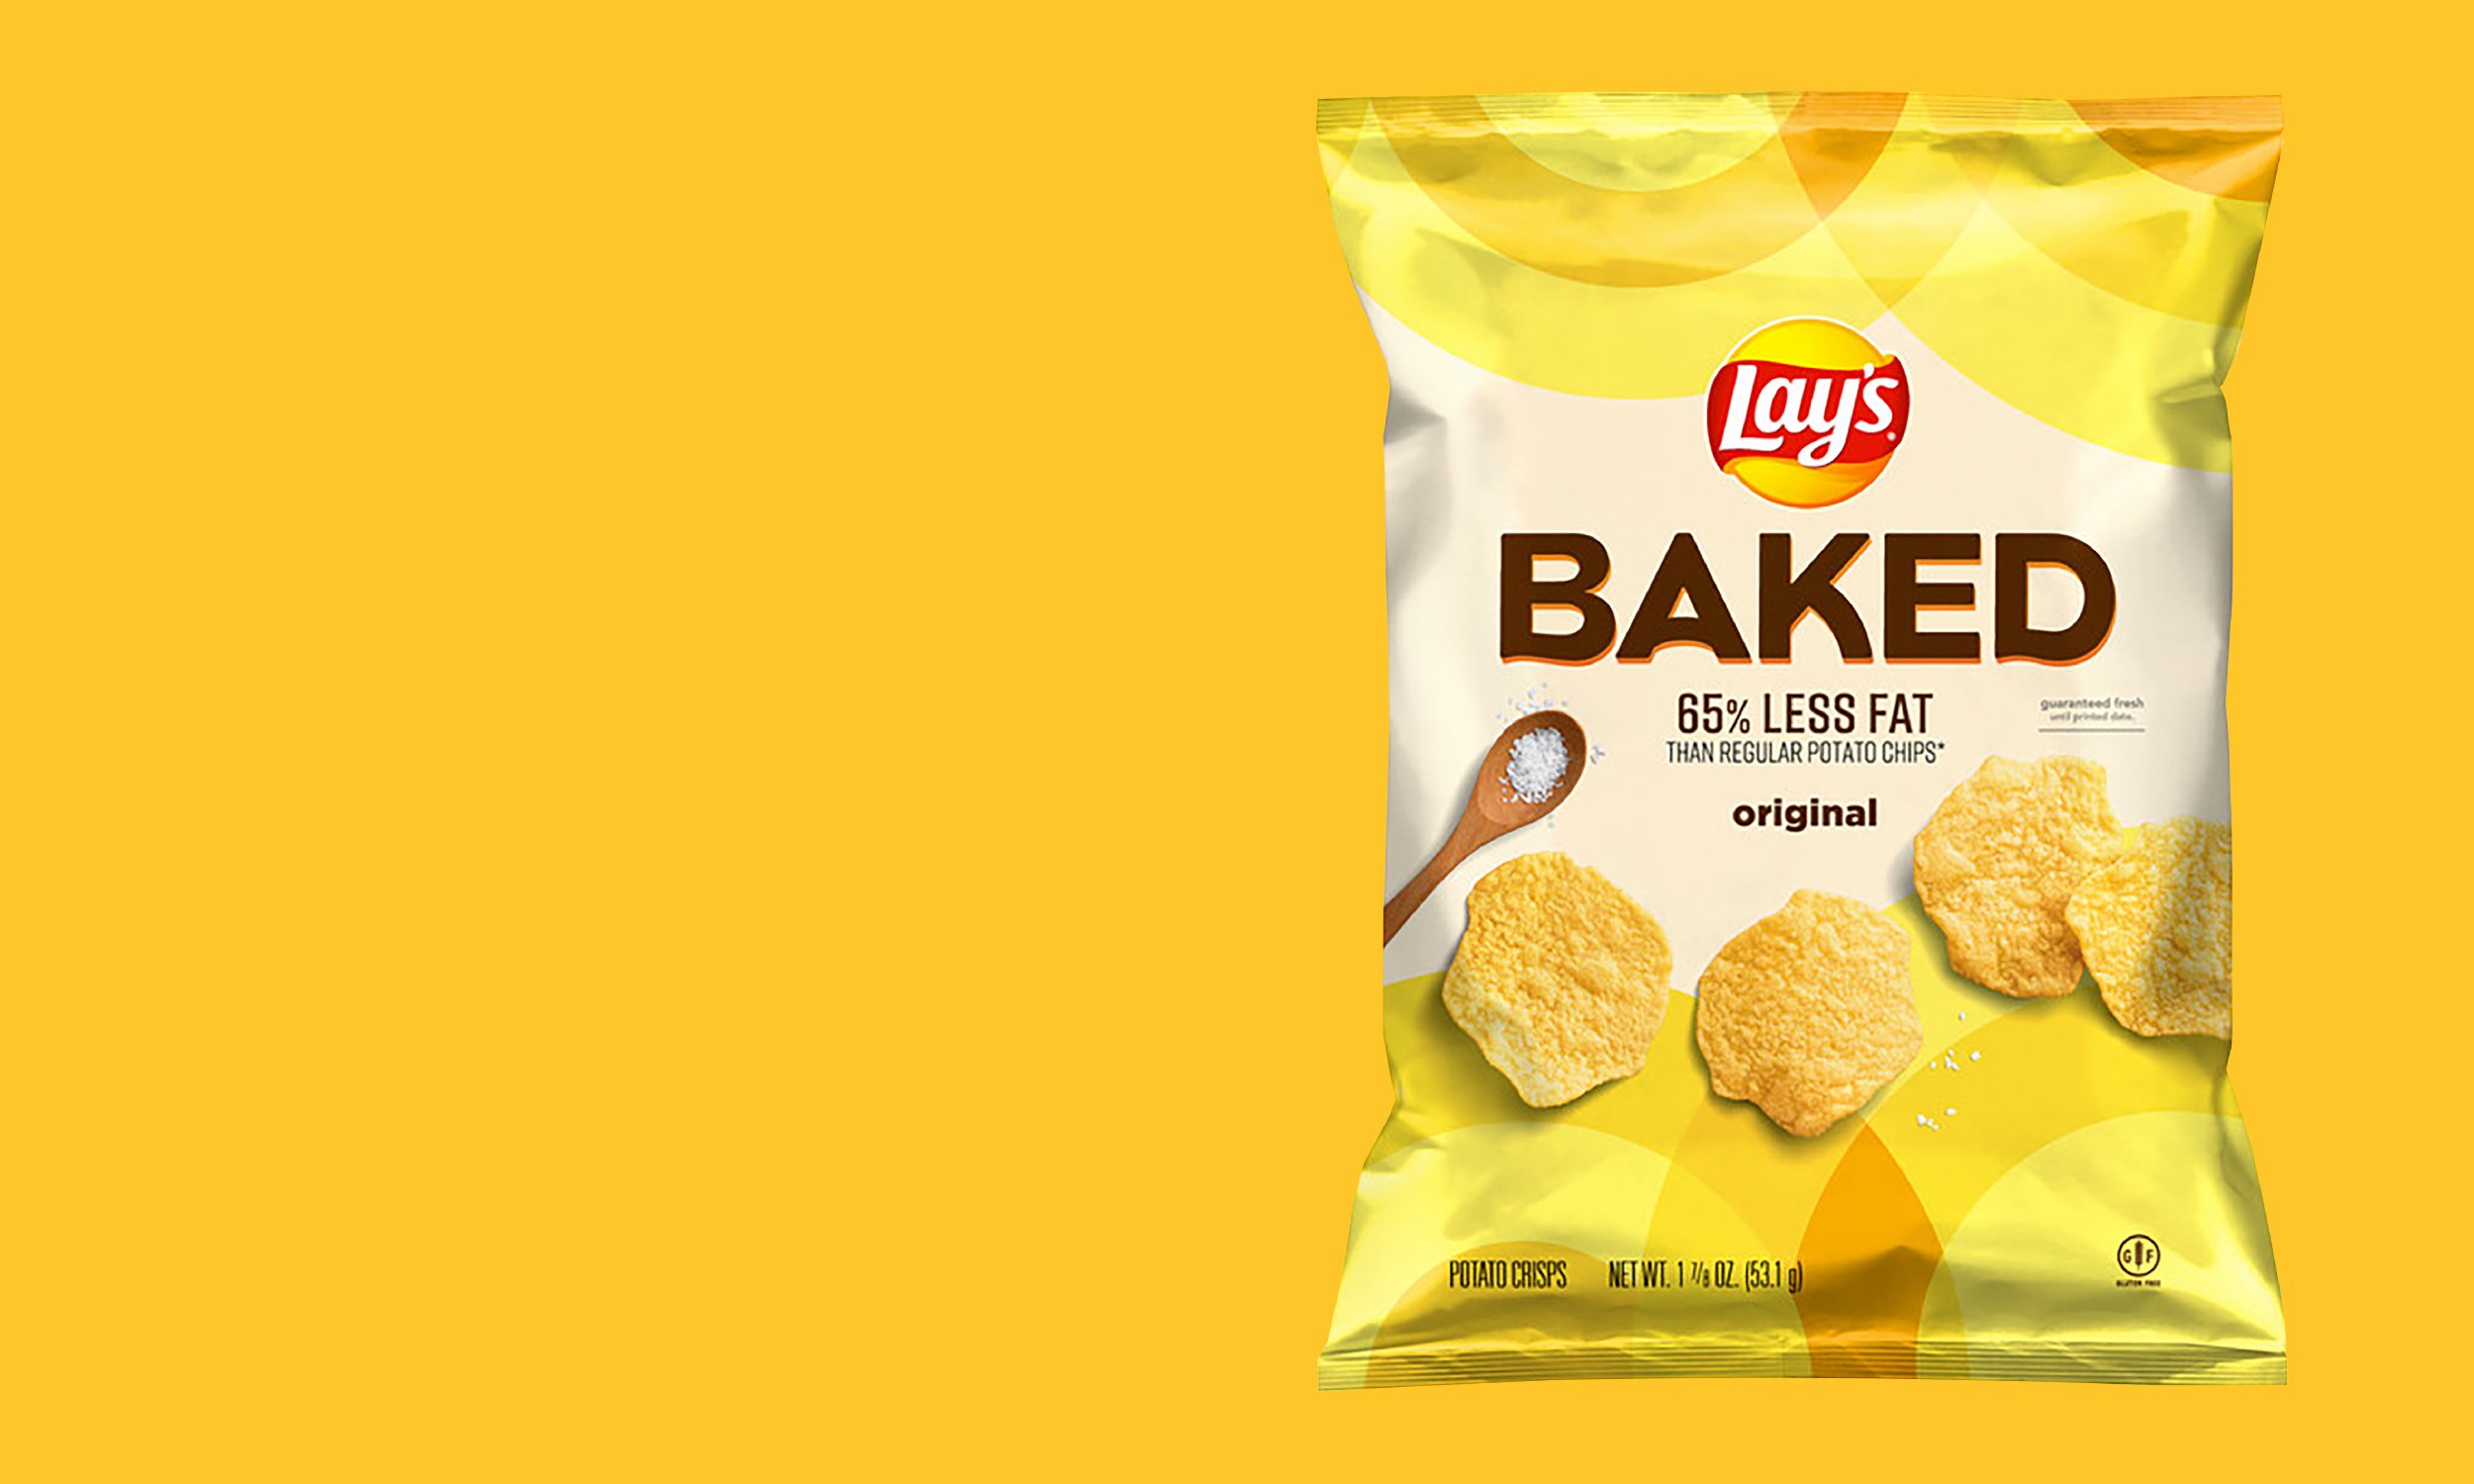 Bag of Baked Lay's chips